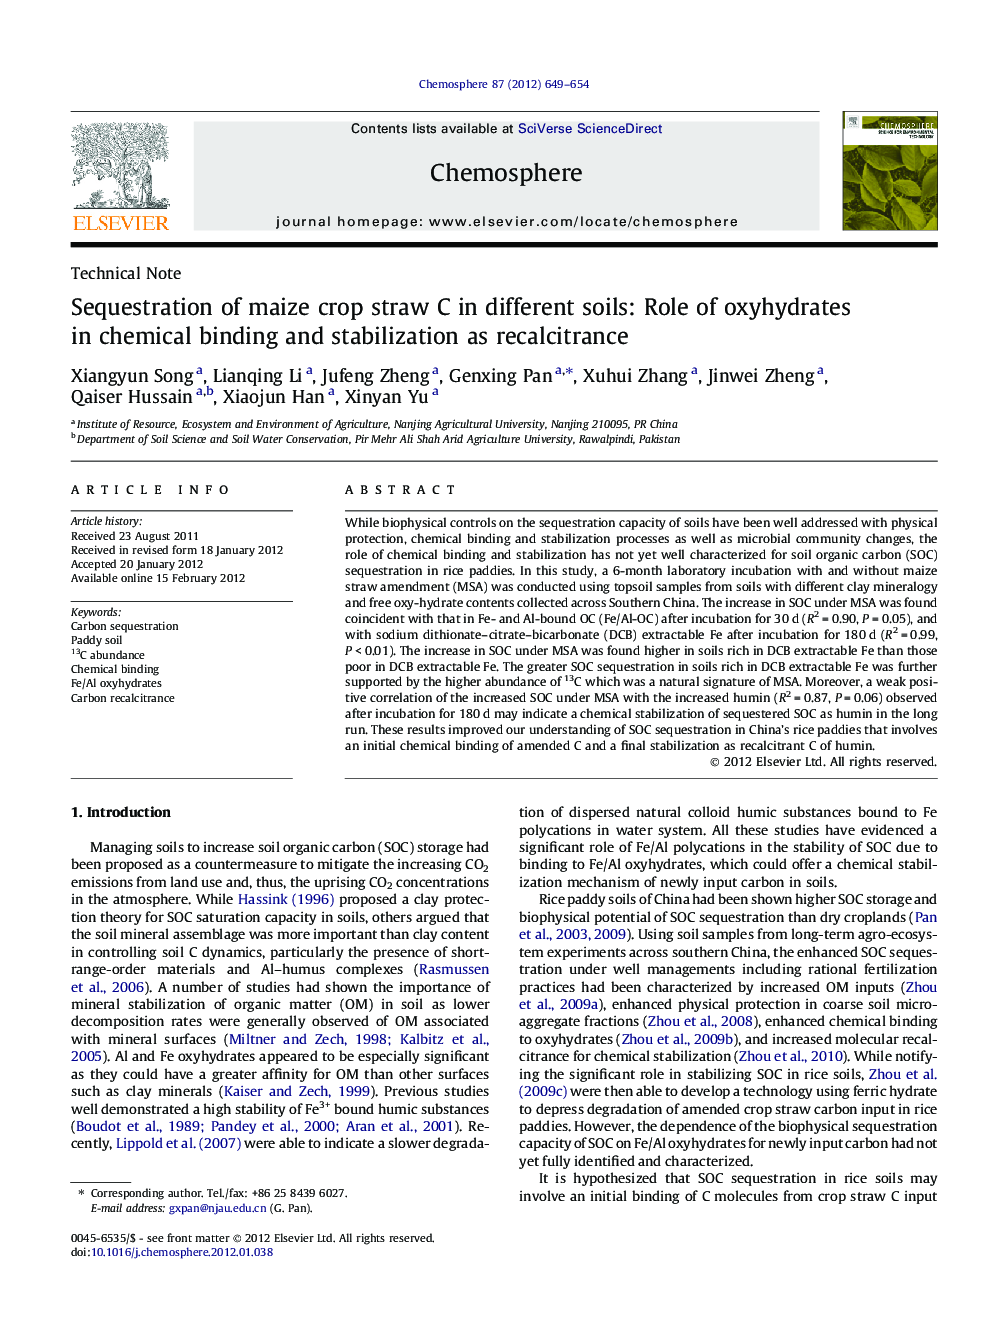 Sequestration of maize crop straw C in different soils: Role of oxyhydrates in chemical binding and stabilization as recalcitrance